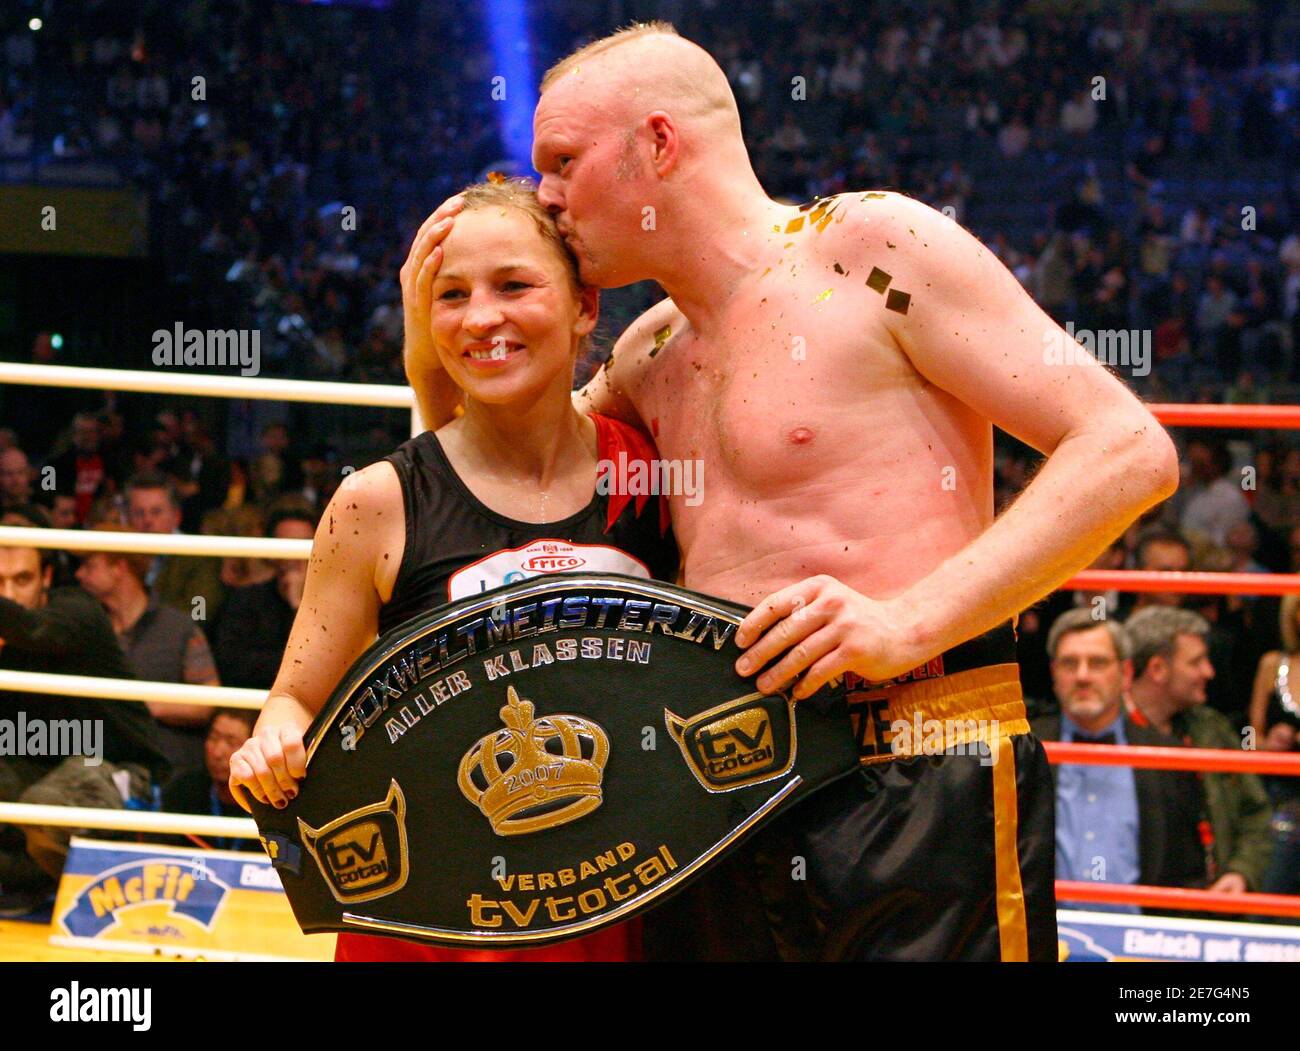 German Women's International Boxing Federation (WIBF) flyweight World  Champion Regina Halmich (L) punches entertainer Stefan Raab during their  exhibition boxing match in Cologne March 30, 2007. REUTERS/Alex Grimm  (GERMANY Stock Photo - Alamy